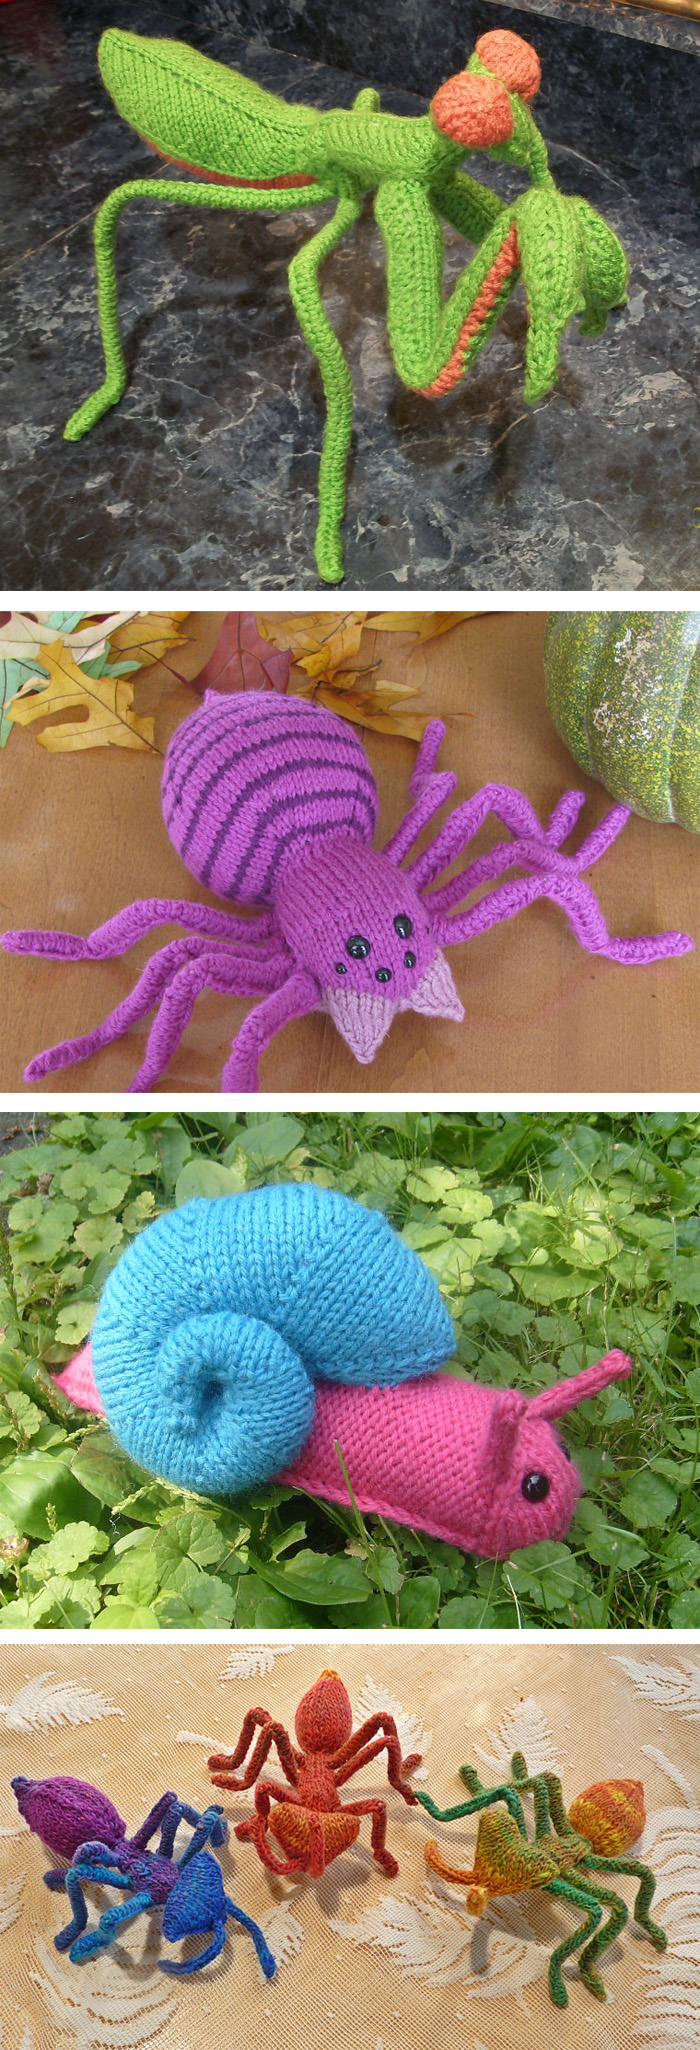 Knitting Patterns for Praying Mantis, Spider, Garden Snail, and Ant